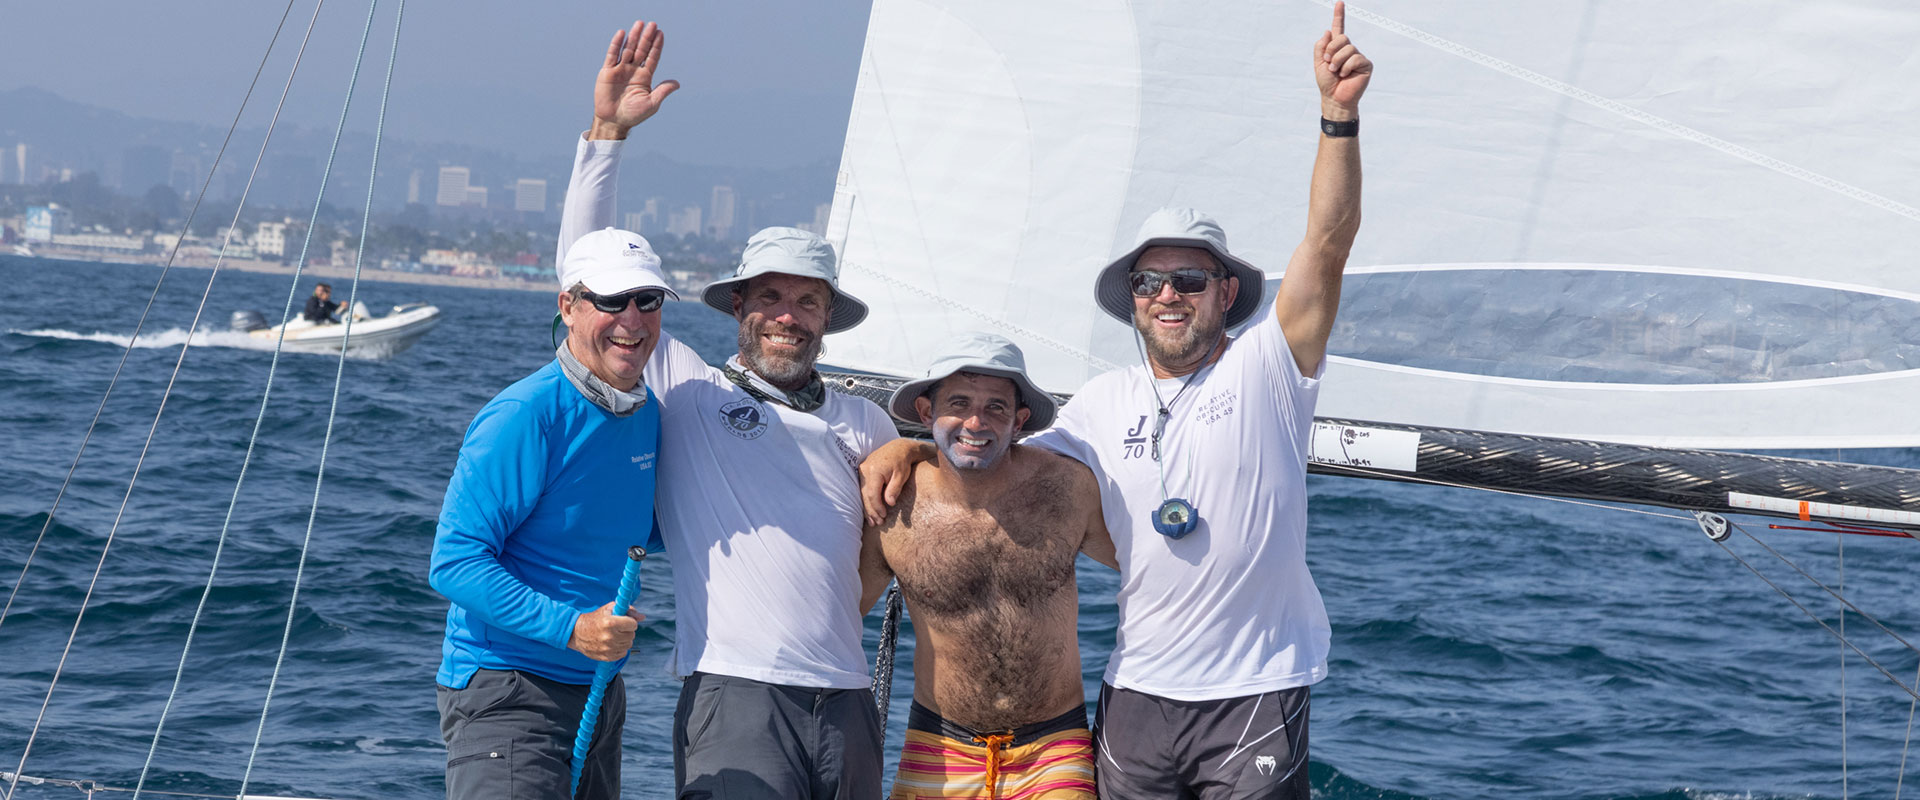 PETER DUNCAN AND RELATIVE OBSCURITY RETURN TO THE PODIUM AS J/70 WORLD CHAMPION AT CAL YACHT CLUB